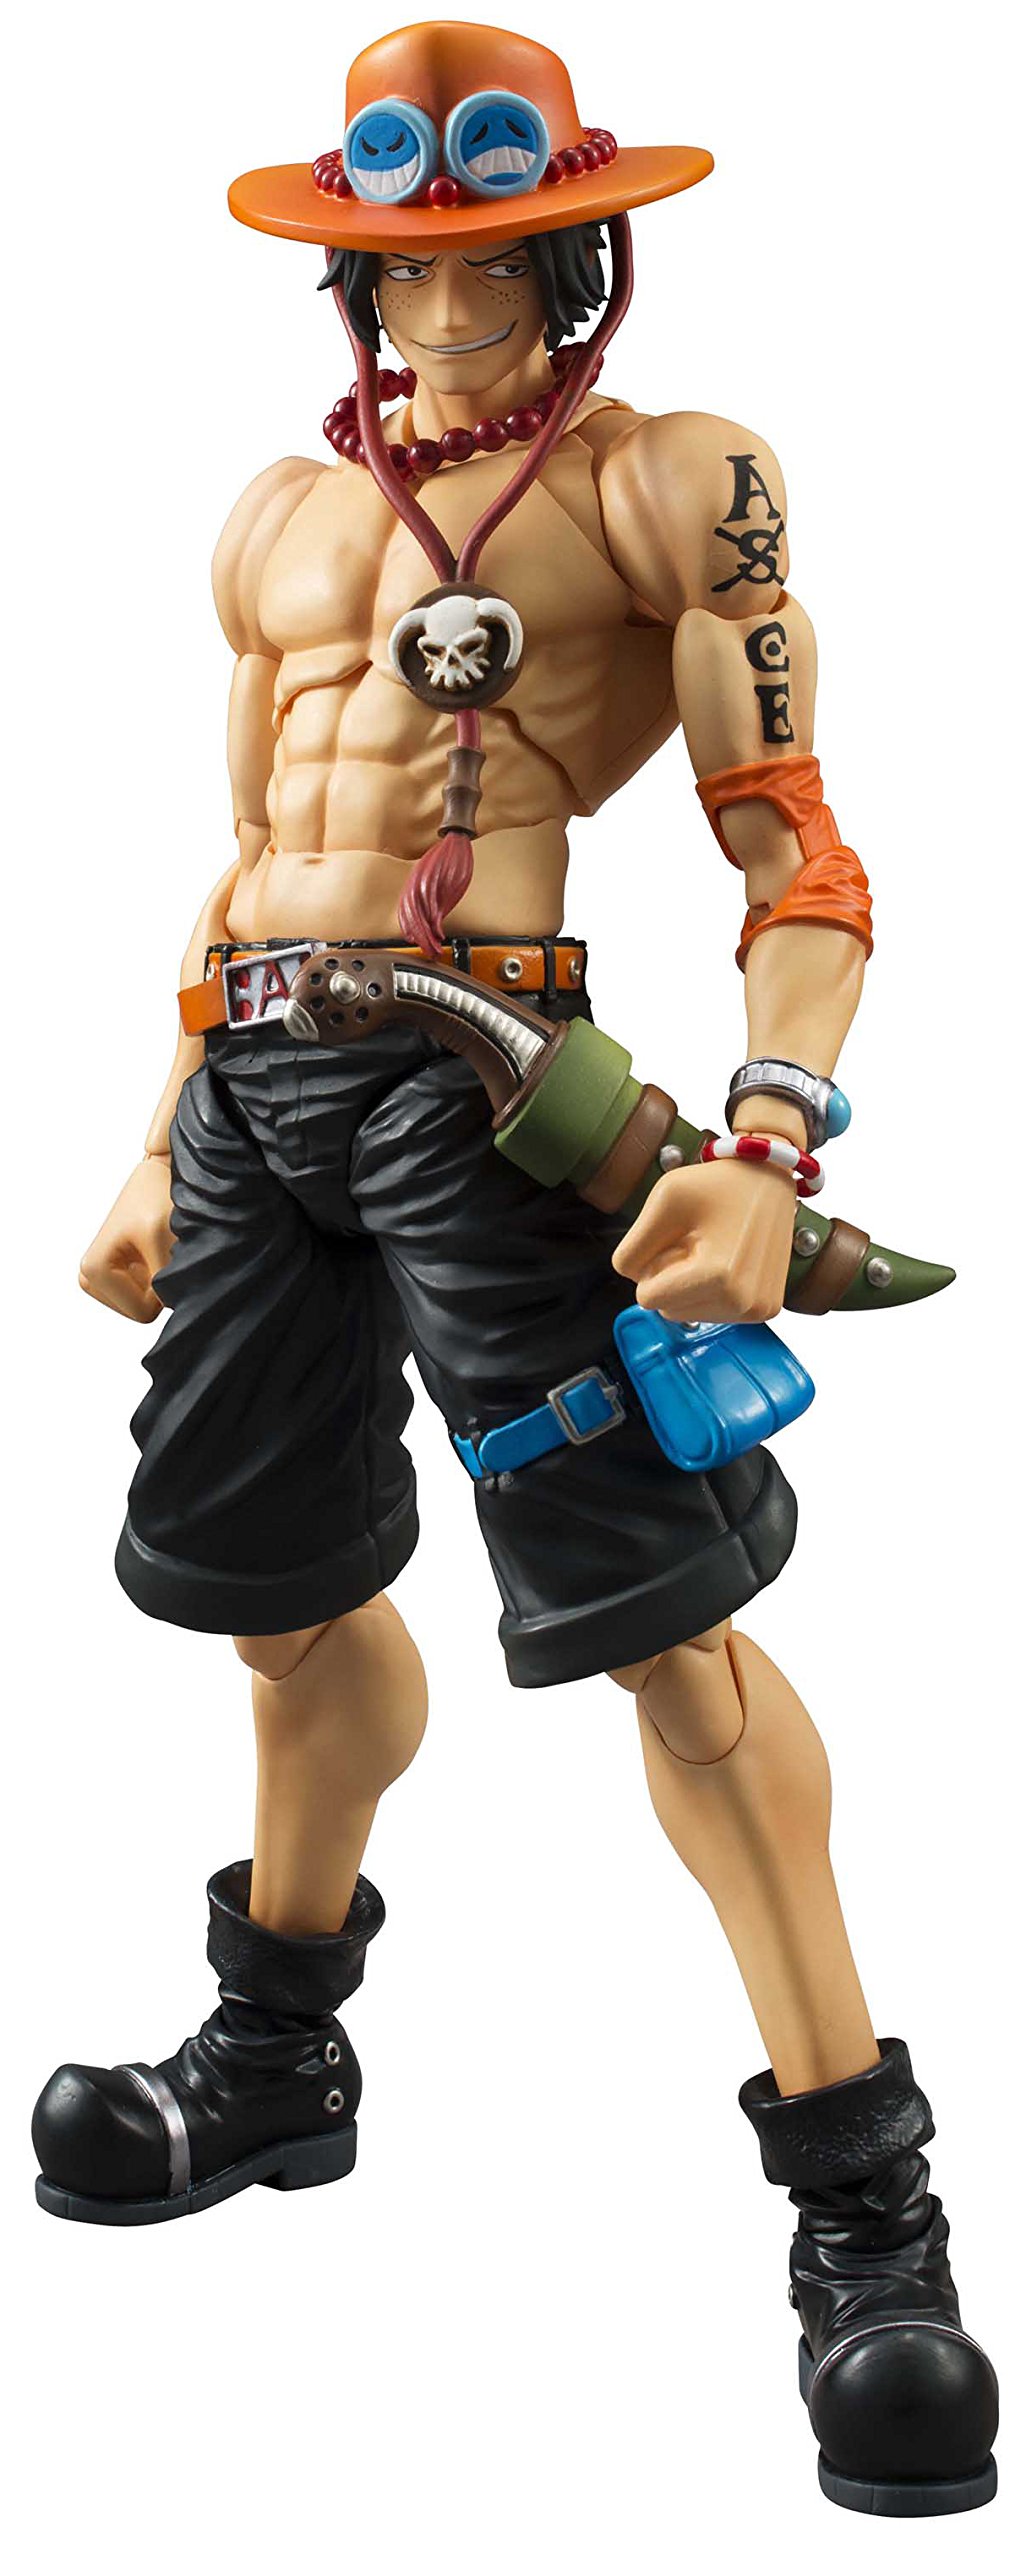 One Piece Portgas D Ace Flame Brother Anime Action Figure Weeb Manga Model  Toy Collectible Set